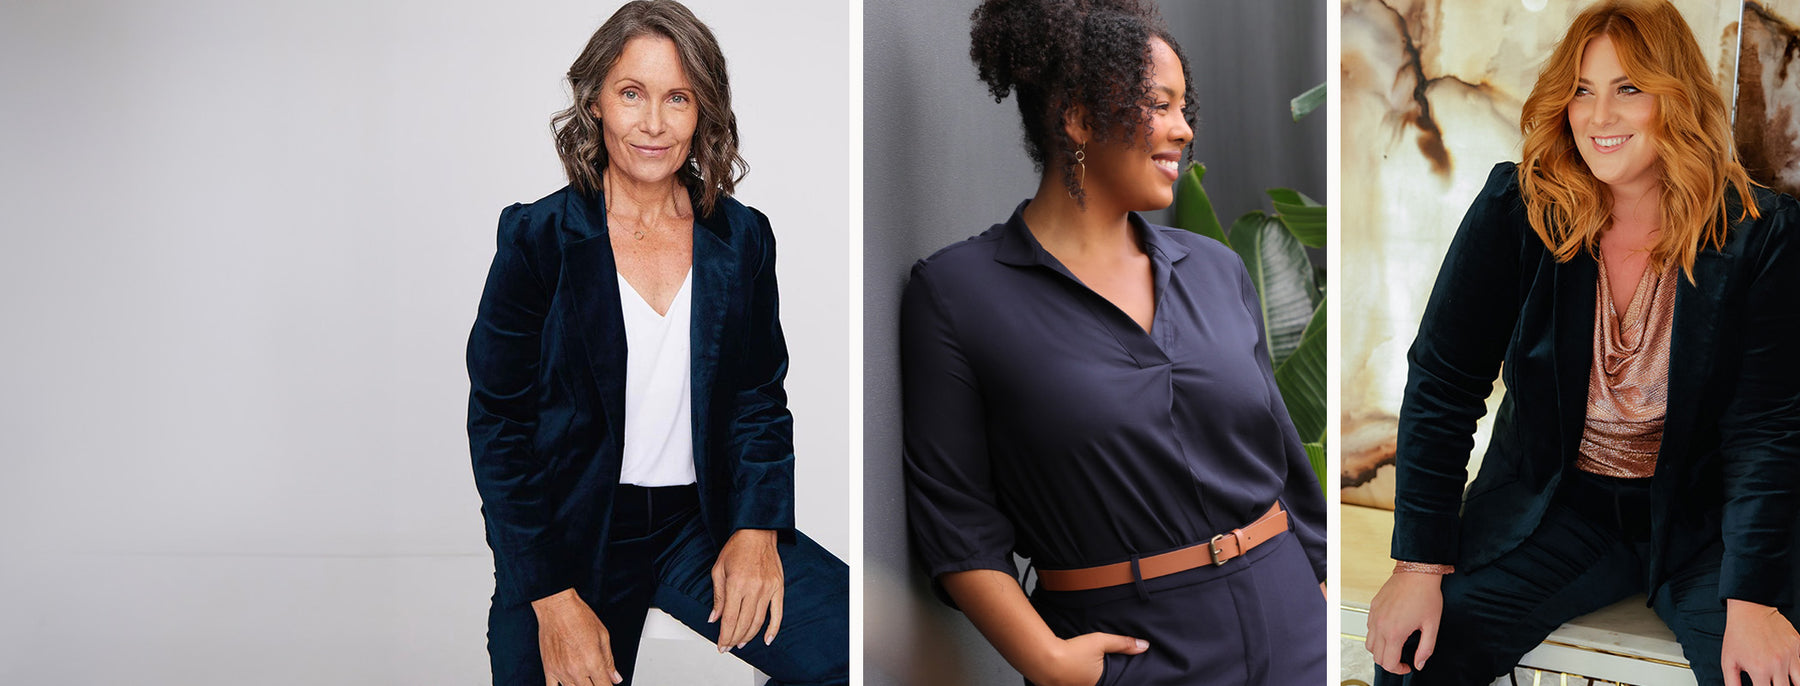 Highlighting Australian fashion brand, Leina & Fleur's inclusive clothing range, three women are pictured. Woman 1 is a 50 plus woman in velvet cocktail suit and white t-shirt top. Woman 2 is a size 18 woman wearing plus workwear shirt and navy trousers. Woman 3 is a curvy size 18 woman wearing a plus size velvet pant suit and shimmer top.